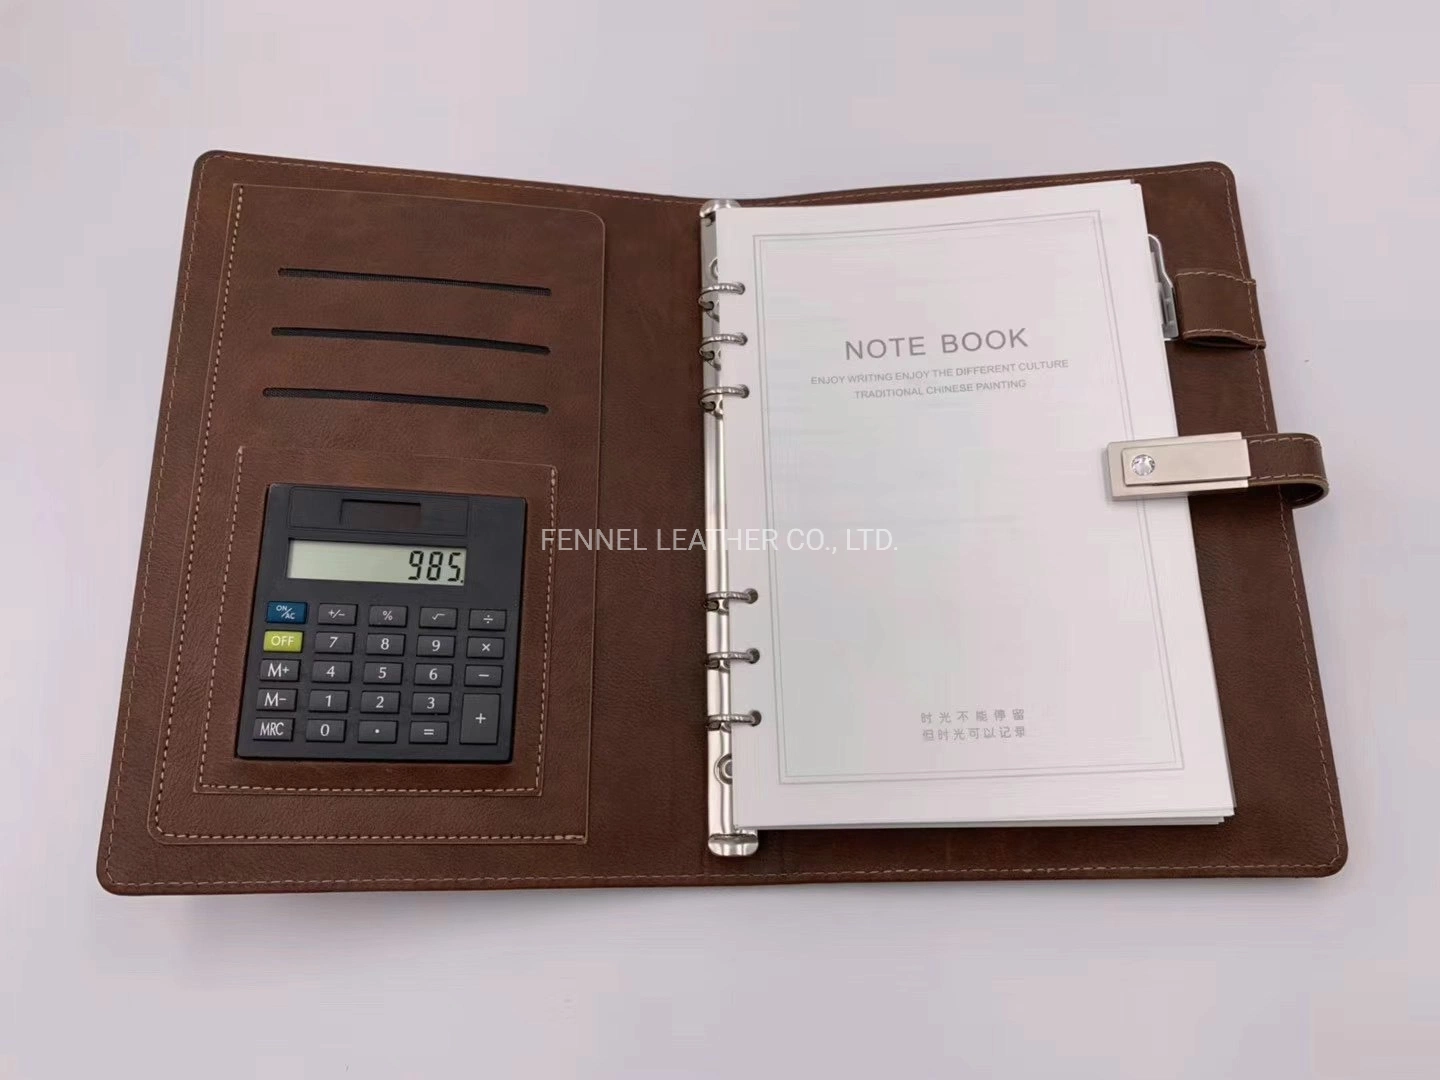 Popular Business Notebook with Electronic Calculator and Phone Charger Notebook (F1501)